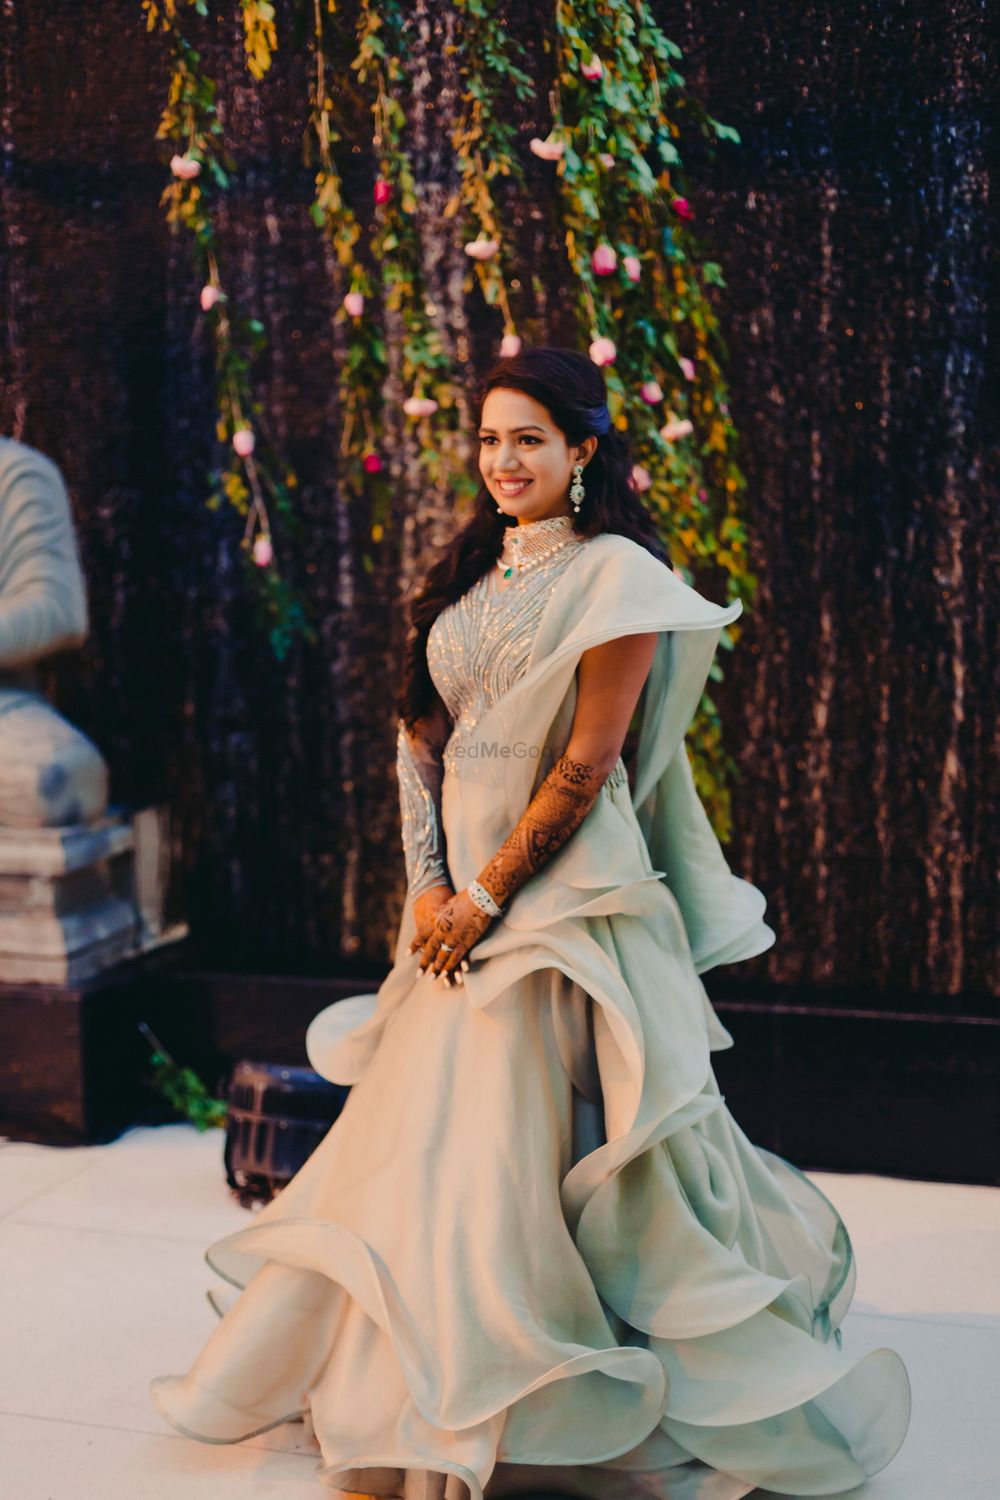 Photo of Seafoam sangeet gown for bride